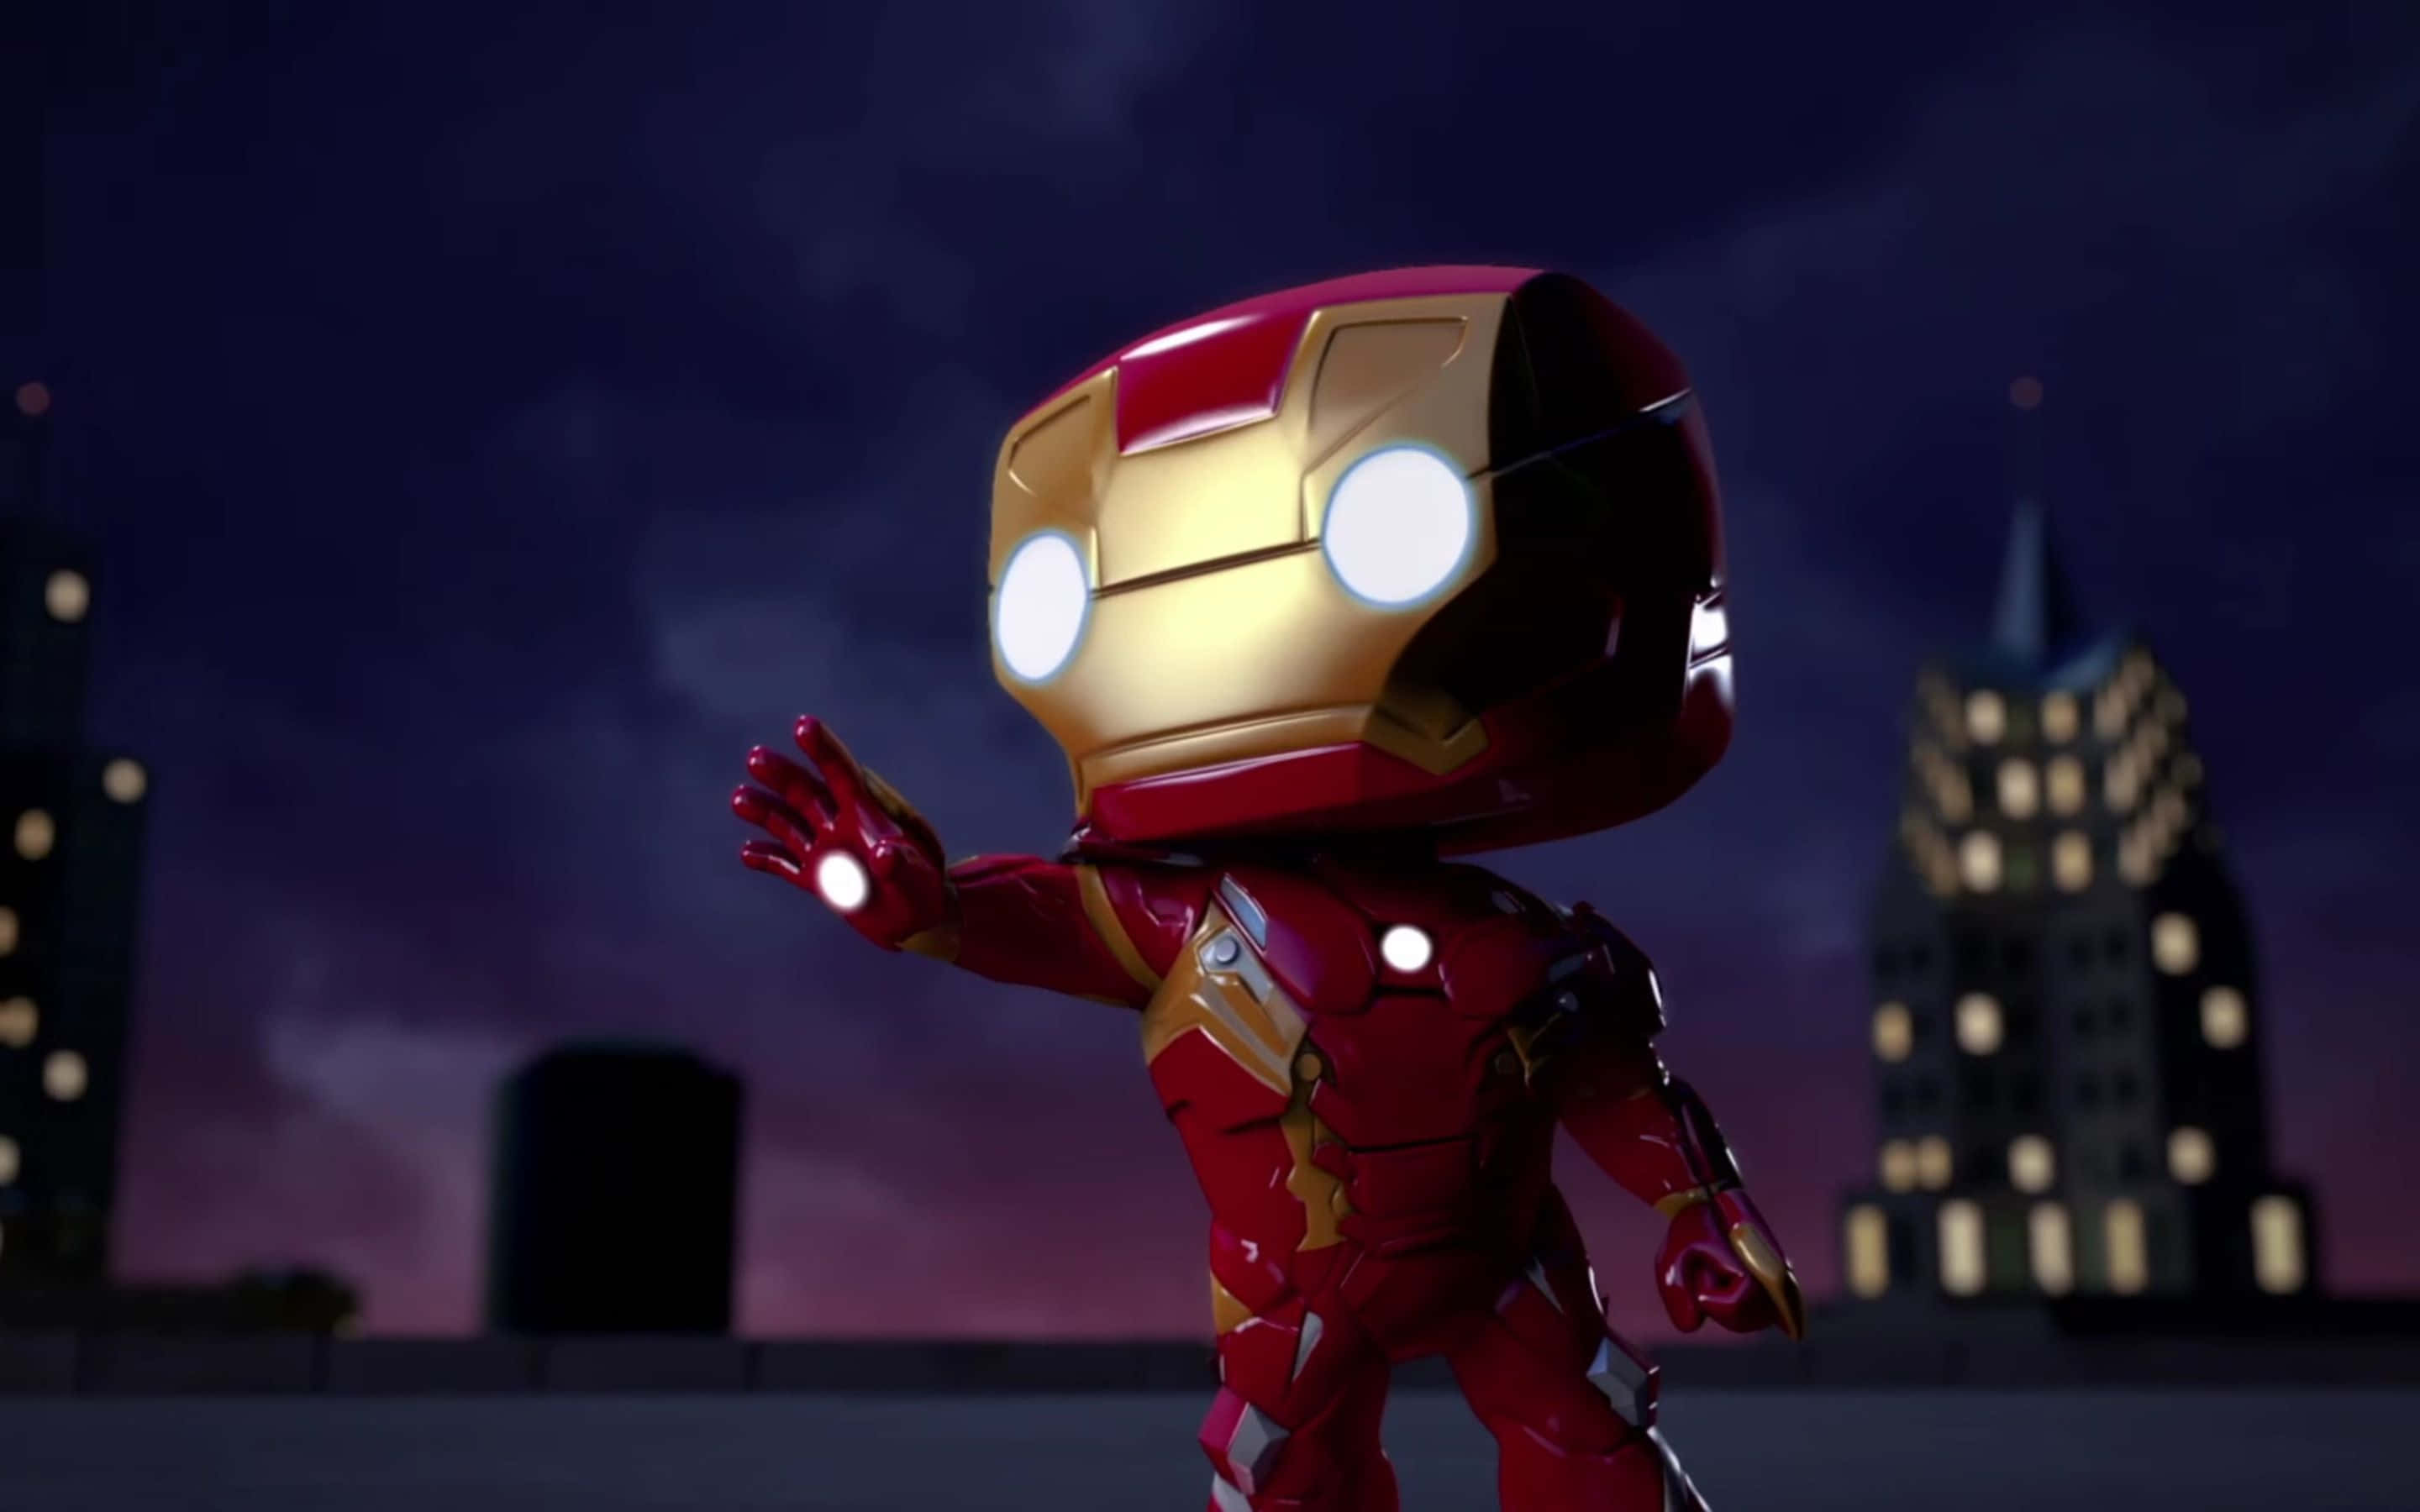 Collectible Iron Man Bobbleheads Perfect for Marvel Fans Wallpaper